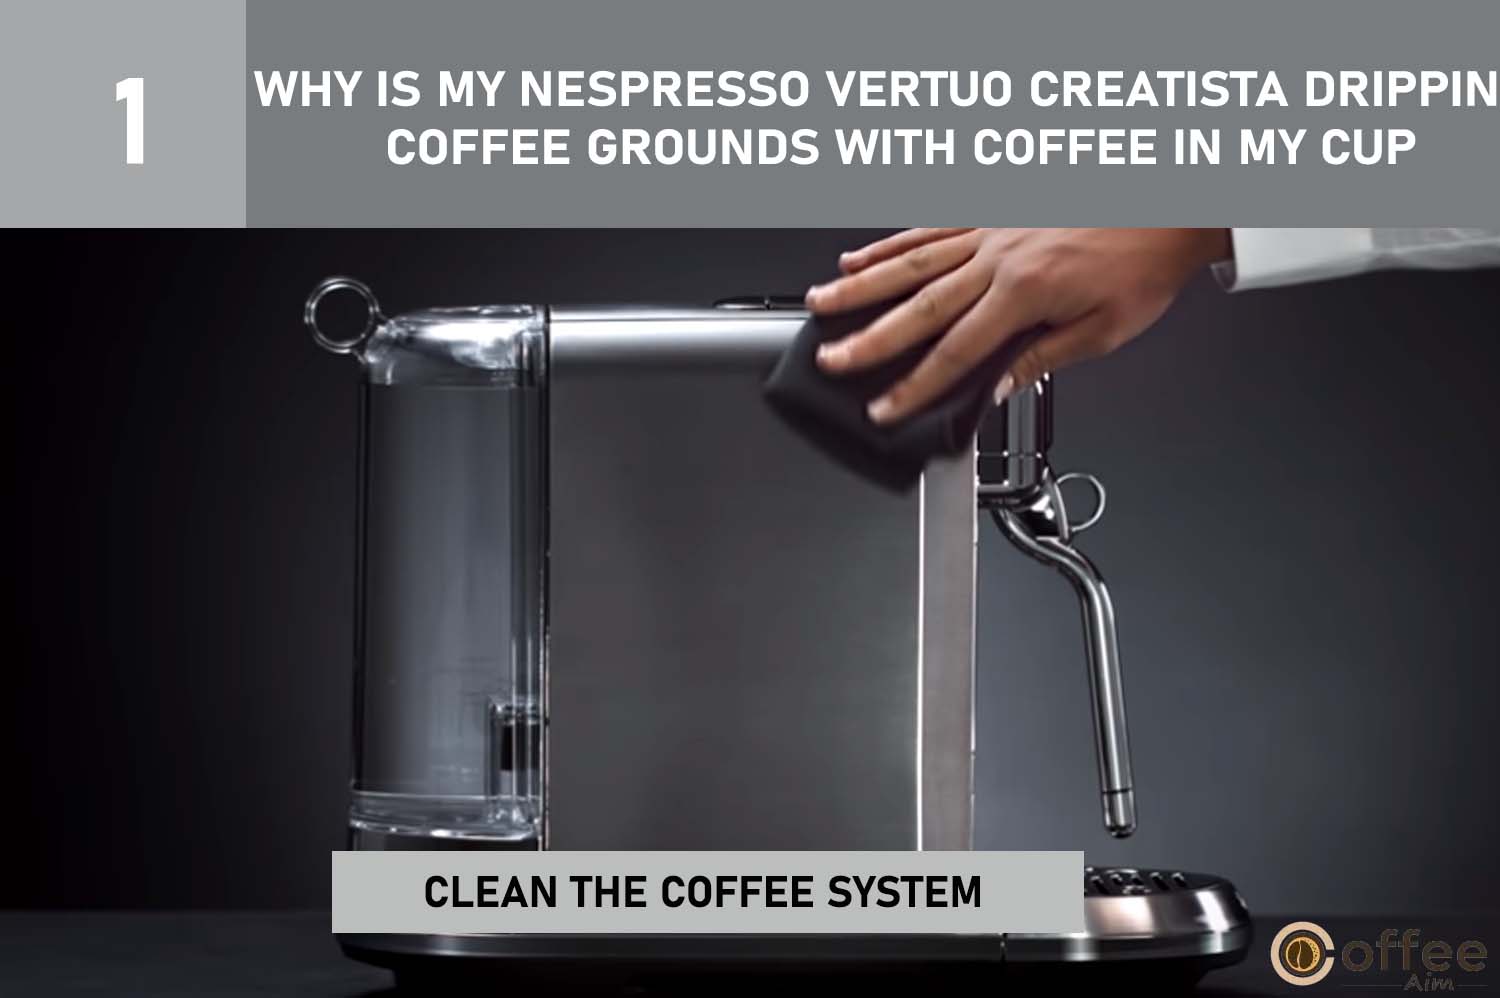 
To fix Nespresso Vertuo Creatista dripping grounds, clean the coffee system. Details in the article "Nespresso Vertuo Creatista Not Working" guide.